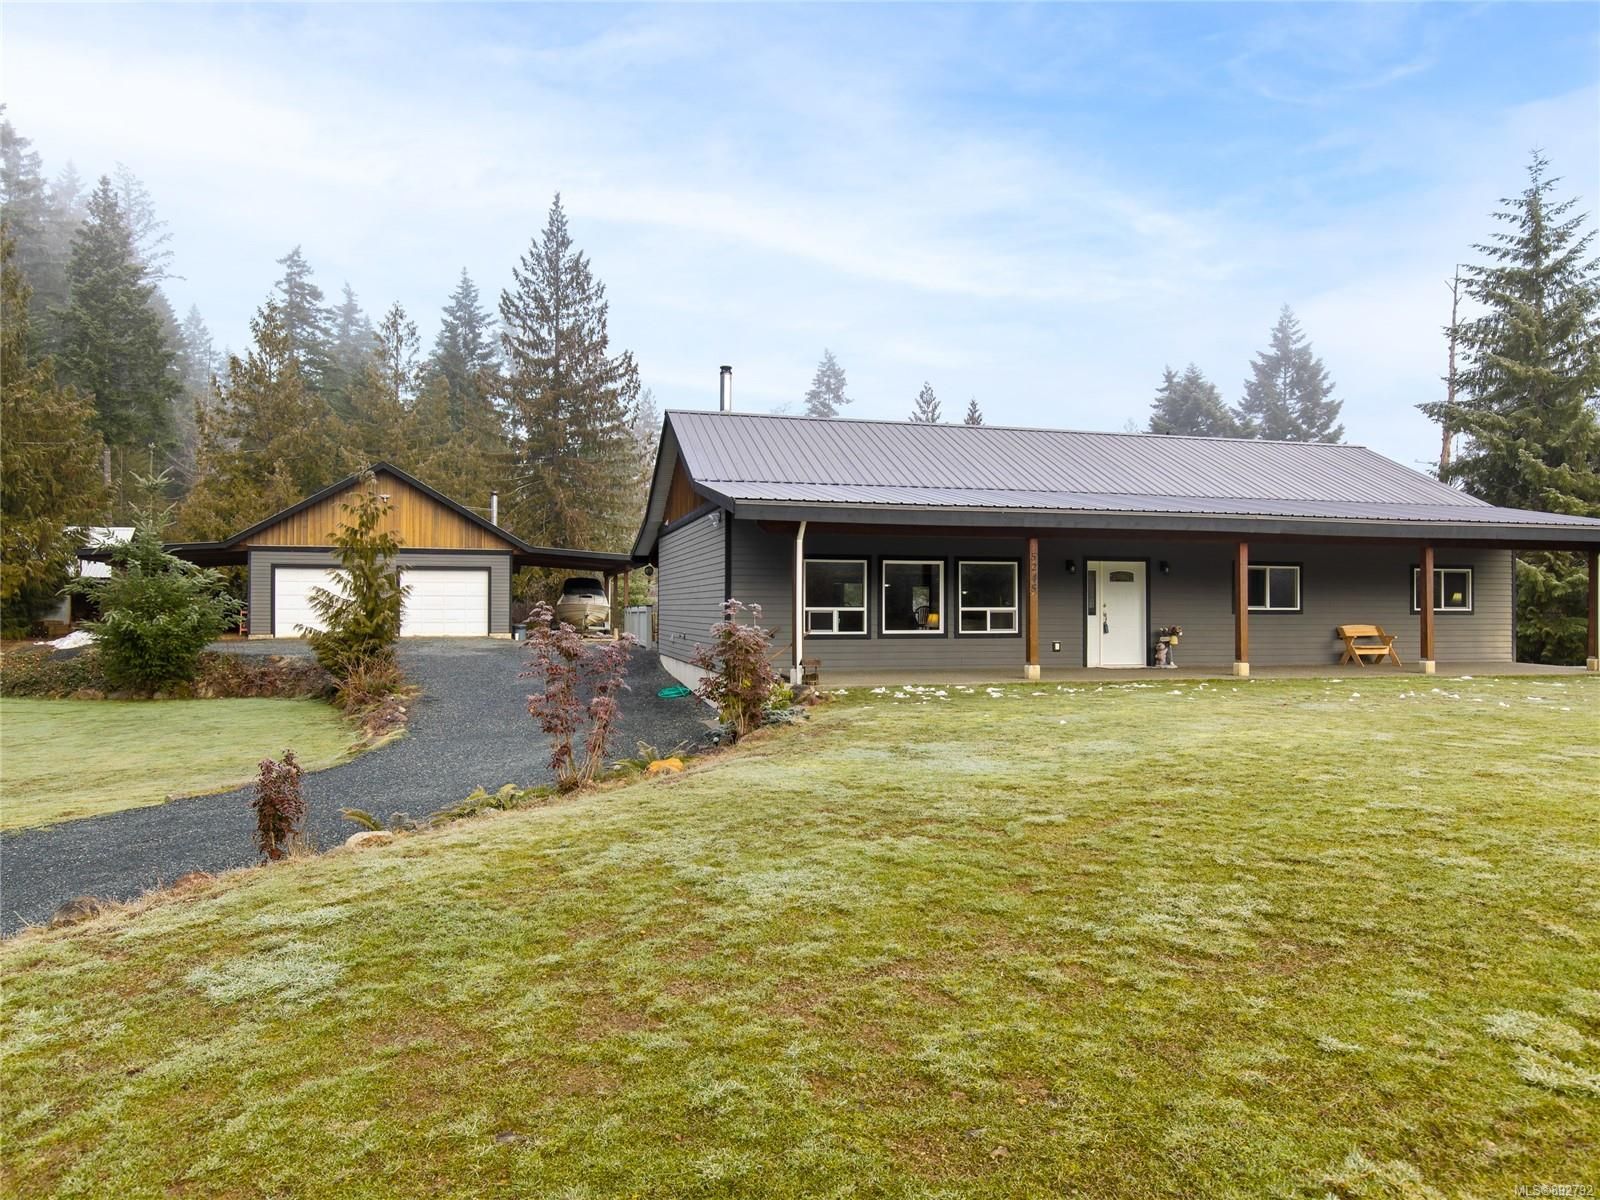 I have sold a property at 5245 Batty Rd in Port Alberni
